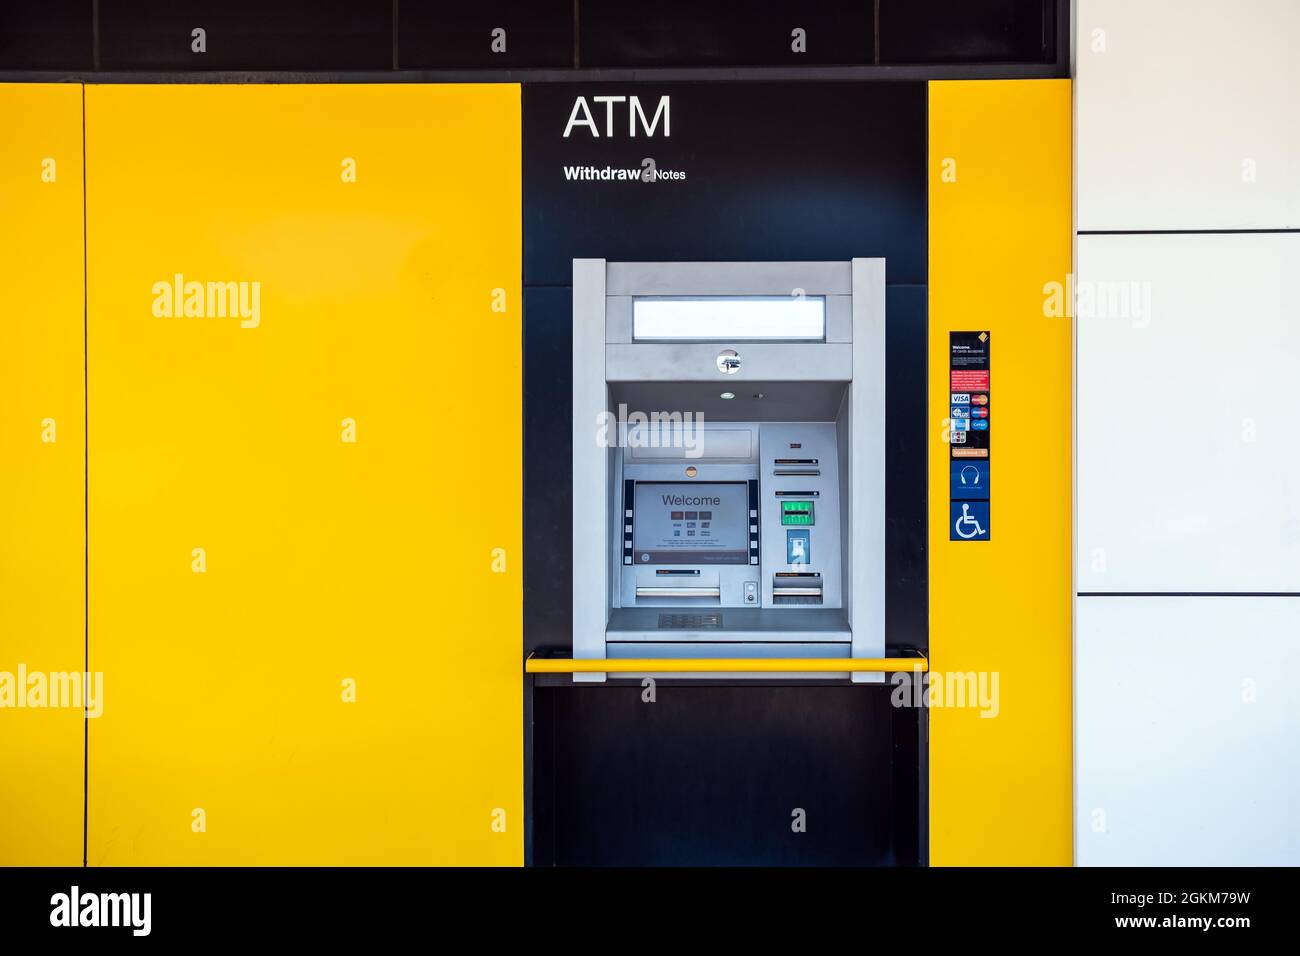 Adelaide, South Australia - August 17, 2019: Commonwealth Bank branch ATM near the entrance to Unley shopping center on a day Stock Photo